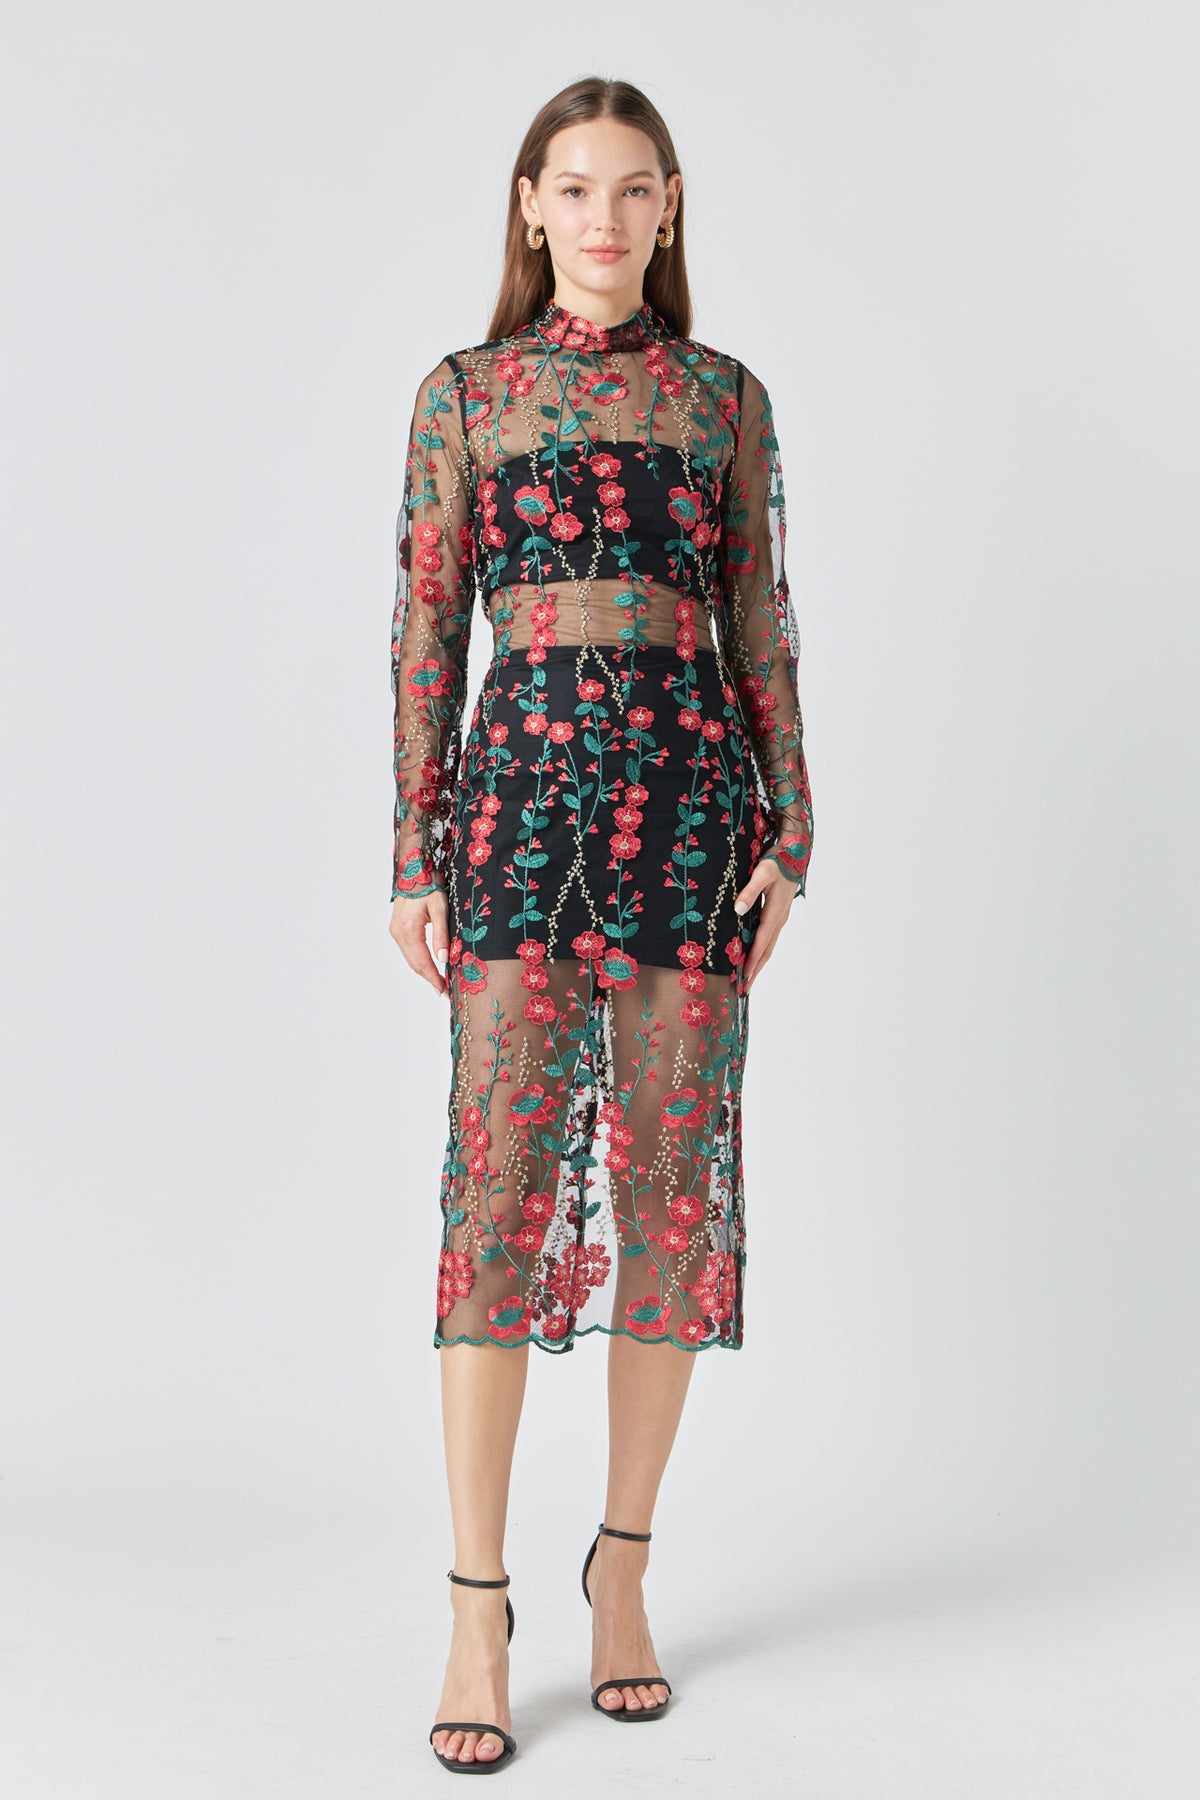 ENDLESS ROSE - Floral Embroidered Midi Dress - DRESSES available at Objectrare